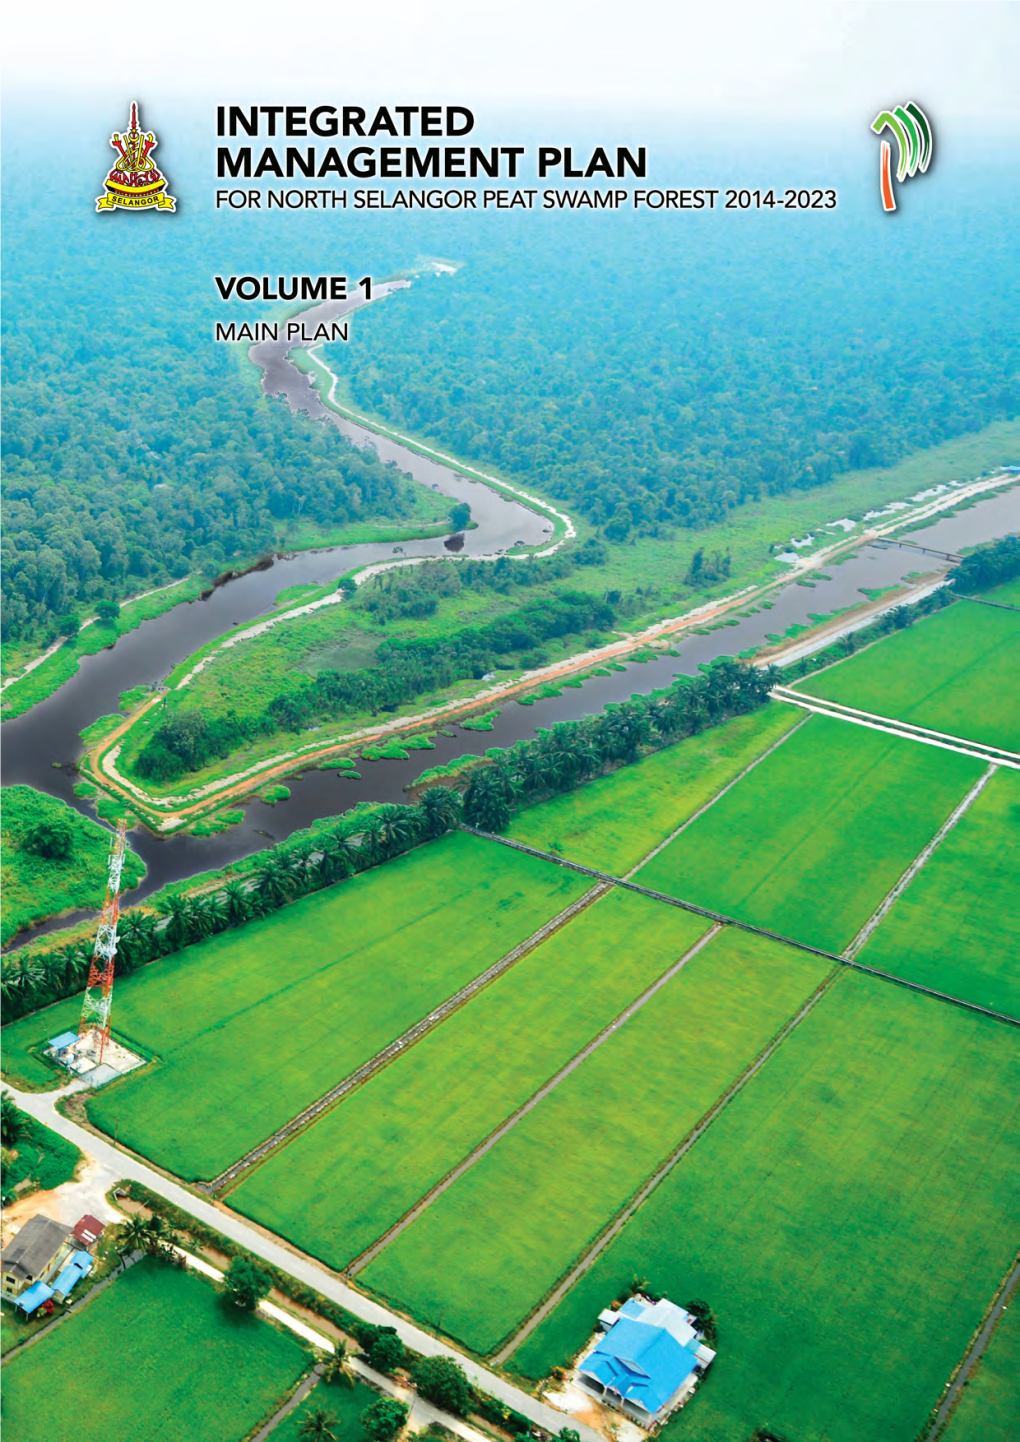 Integrated Management Plan for North Selangor Peat Swamp Forest 2014-2023 (Vol